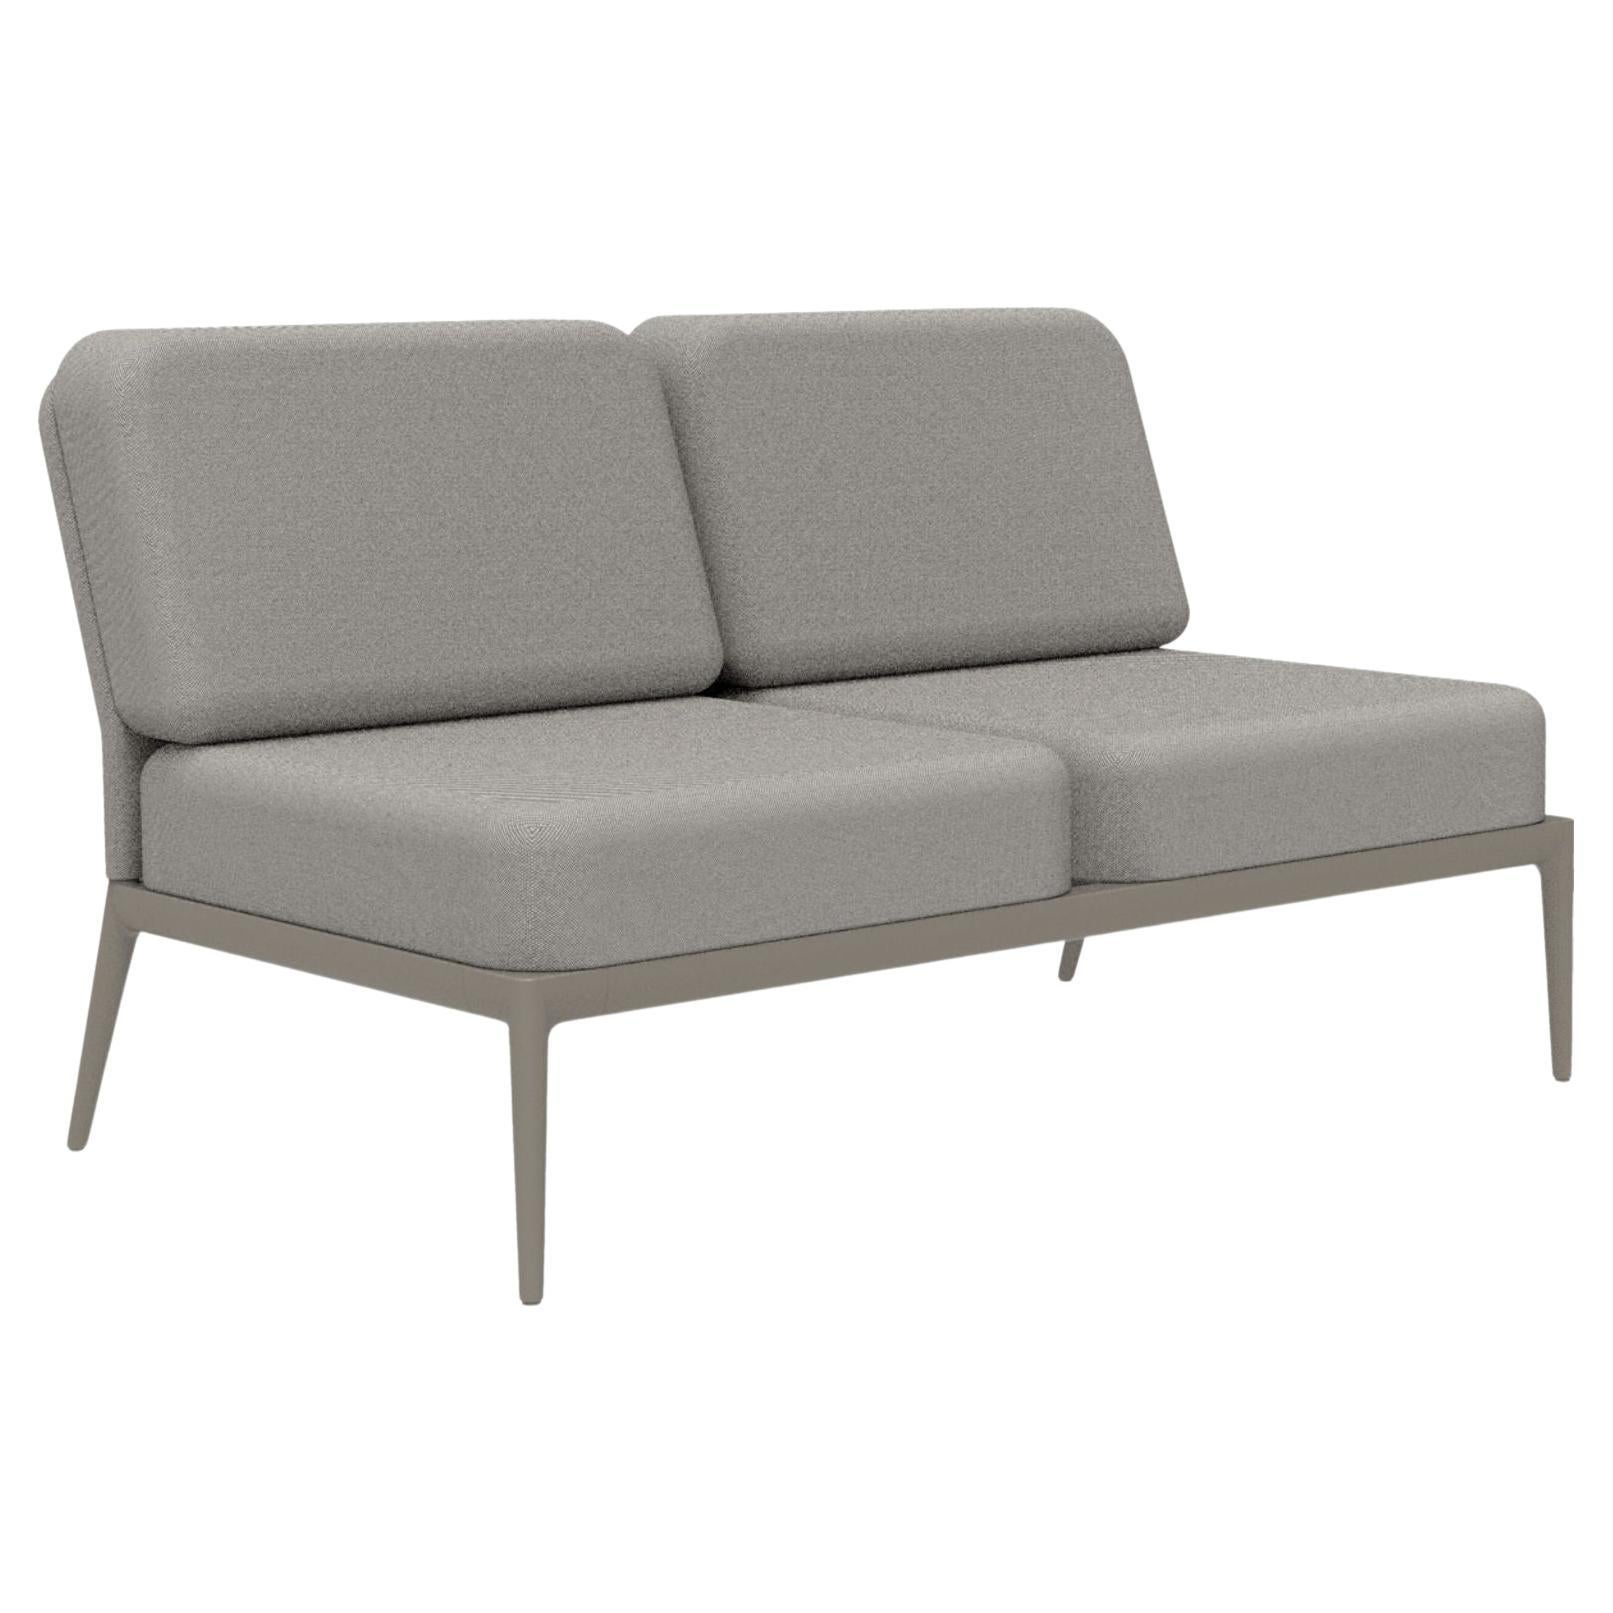 Cover Cream Double Central Modular Sofa by Mowee For Sale